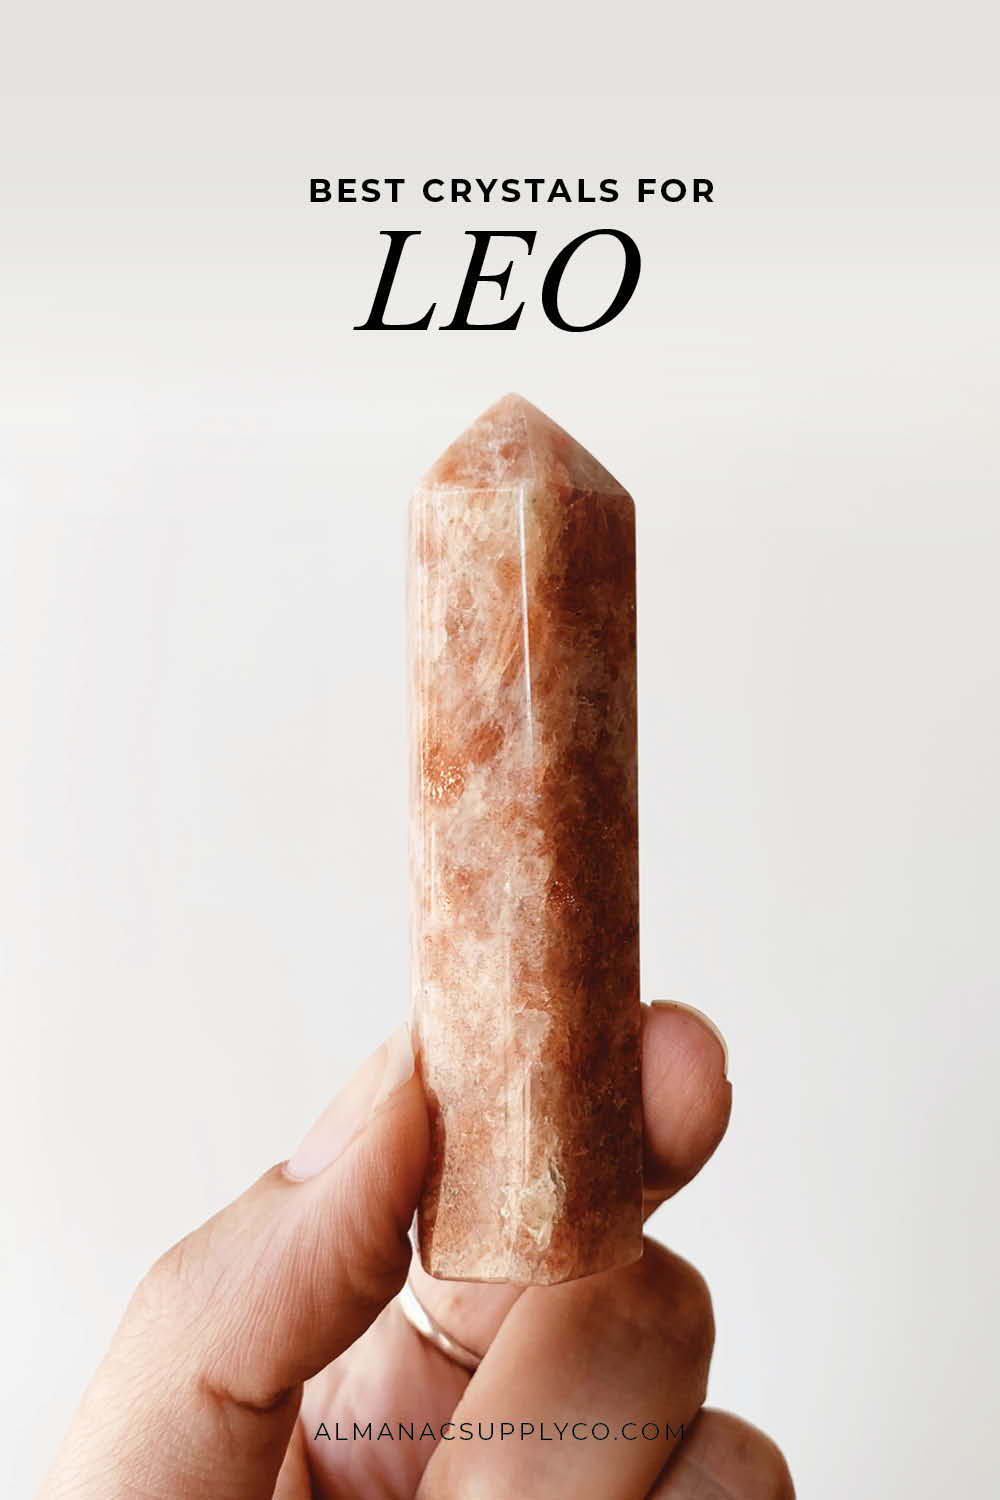 The Best Healing Crystals for Leo - Sunstone Tower